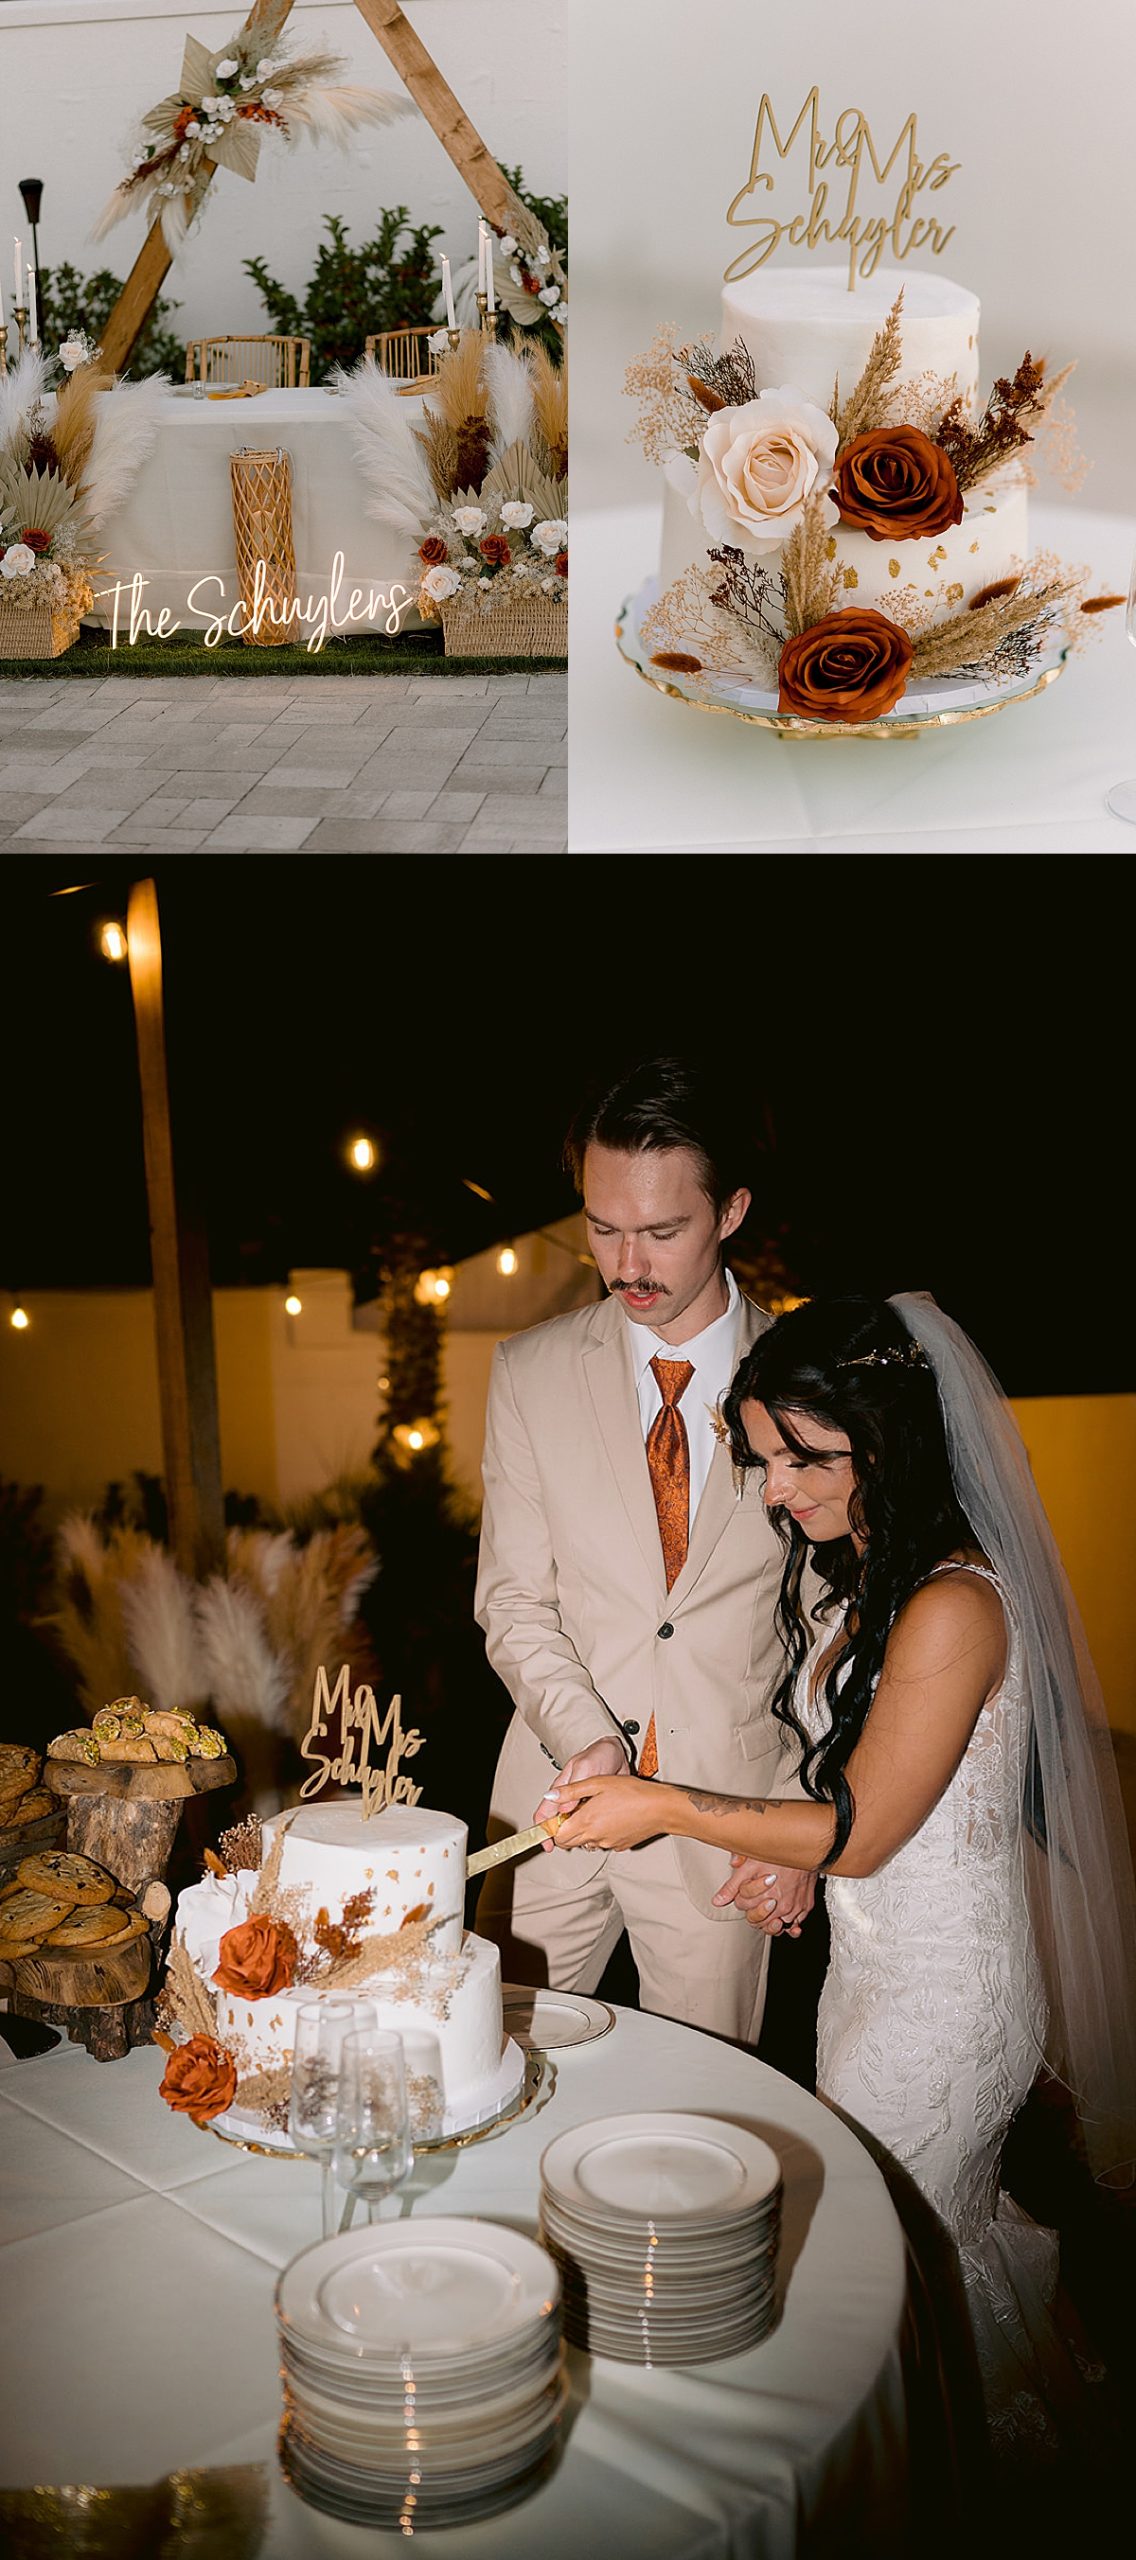 cake cutting with newly married couple at reception by Florida wedding photographer 